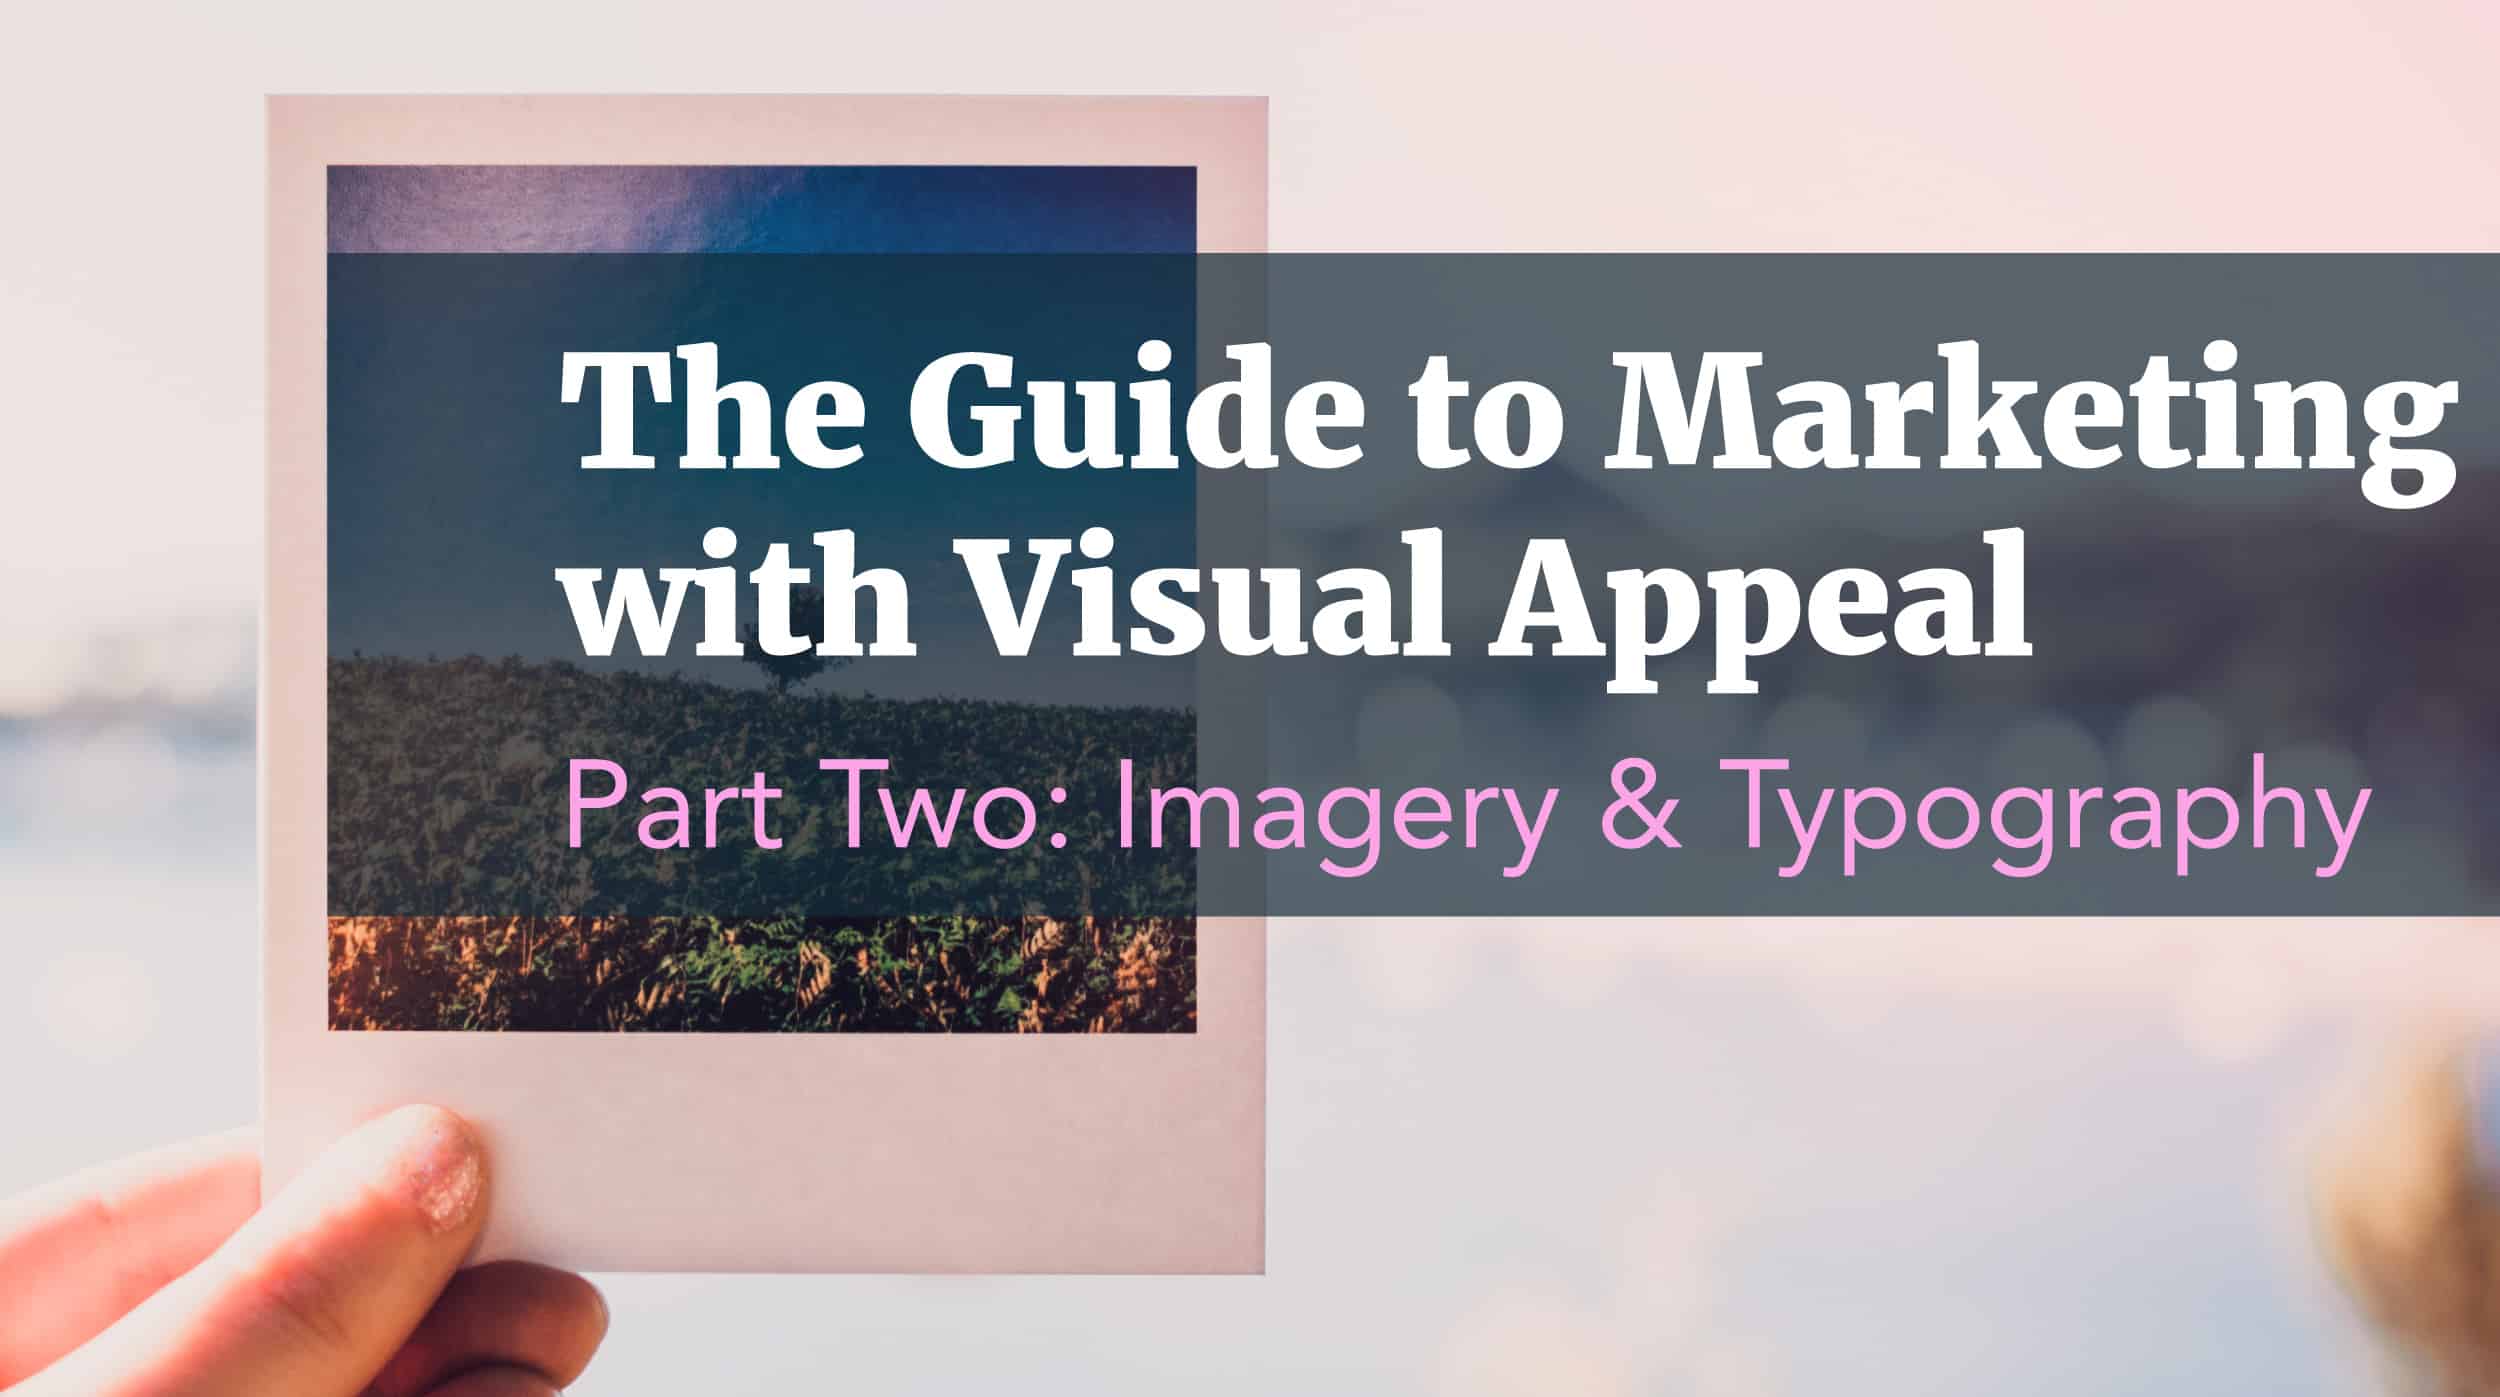 Imagery and Typography in Marketing